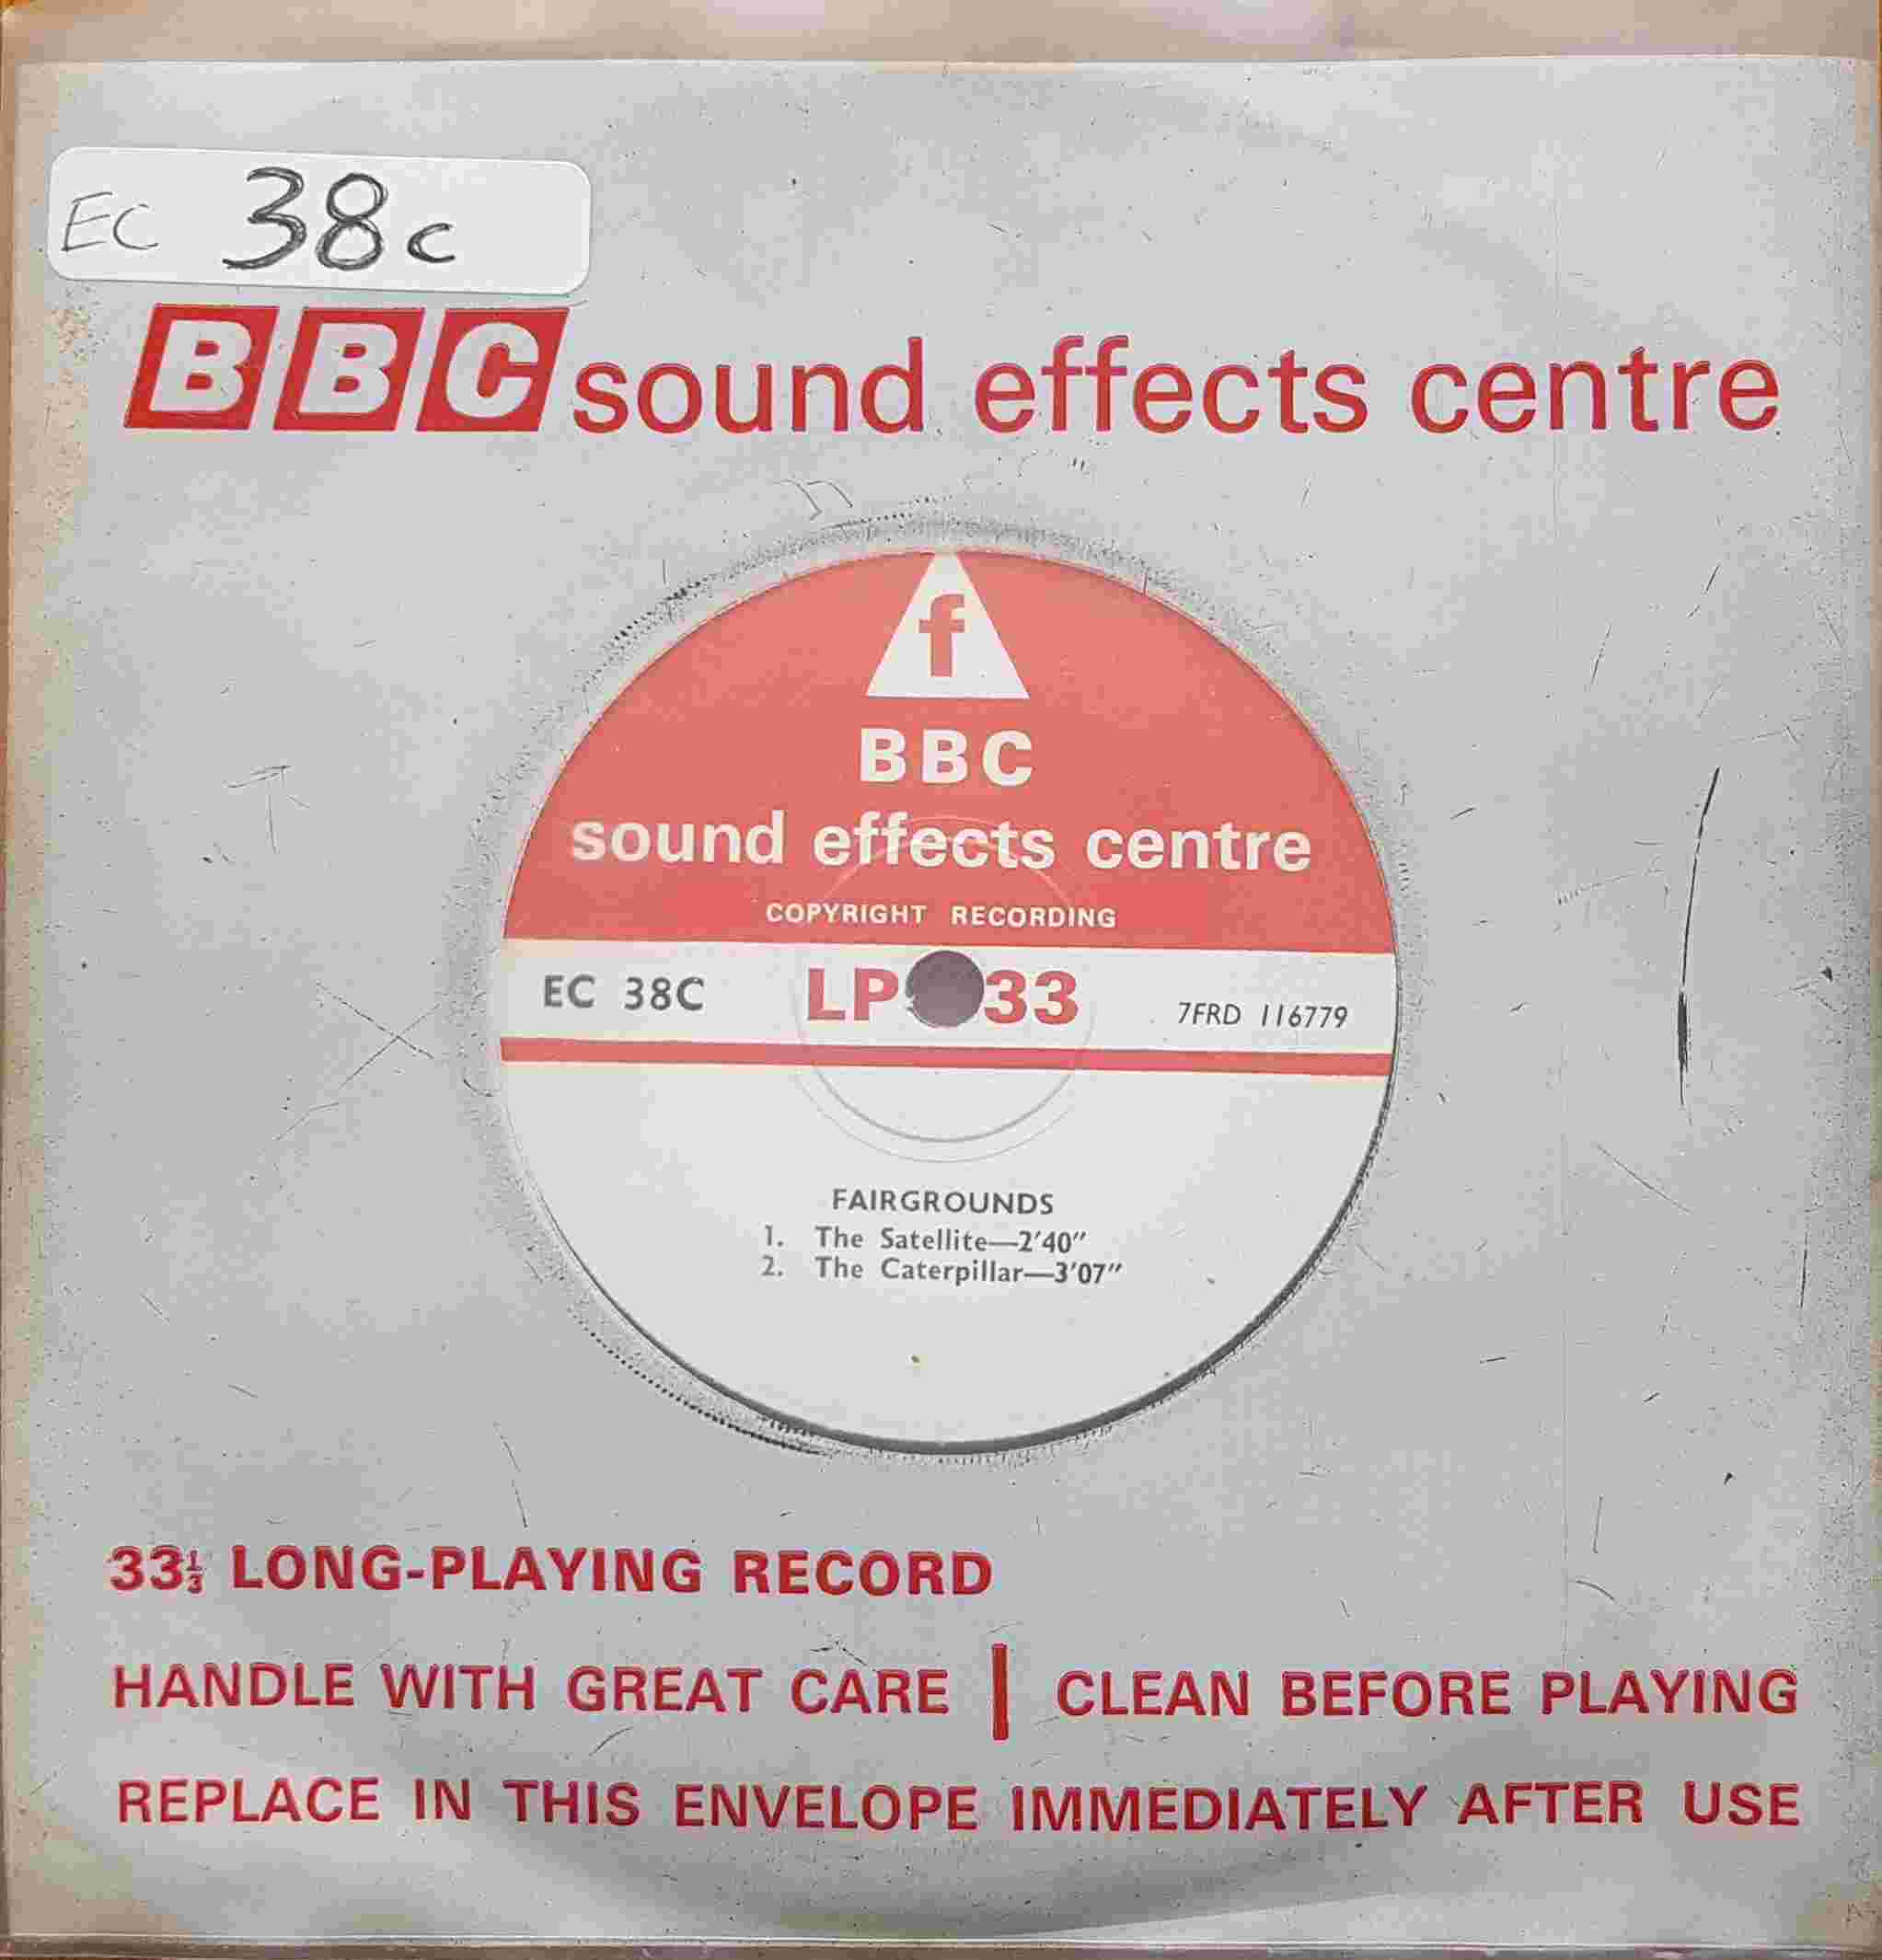 Picture of EC 38C Fairgounds by artist Not registered from the BBC singles - Records and Tapes library